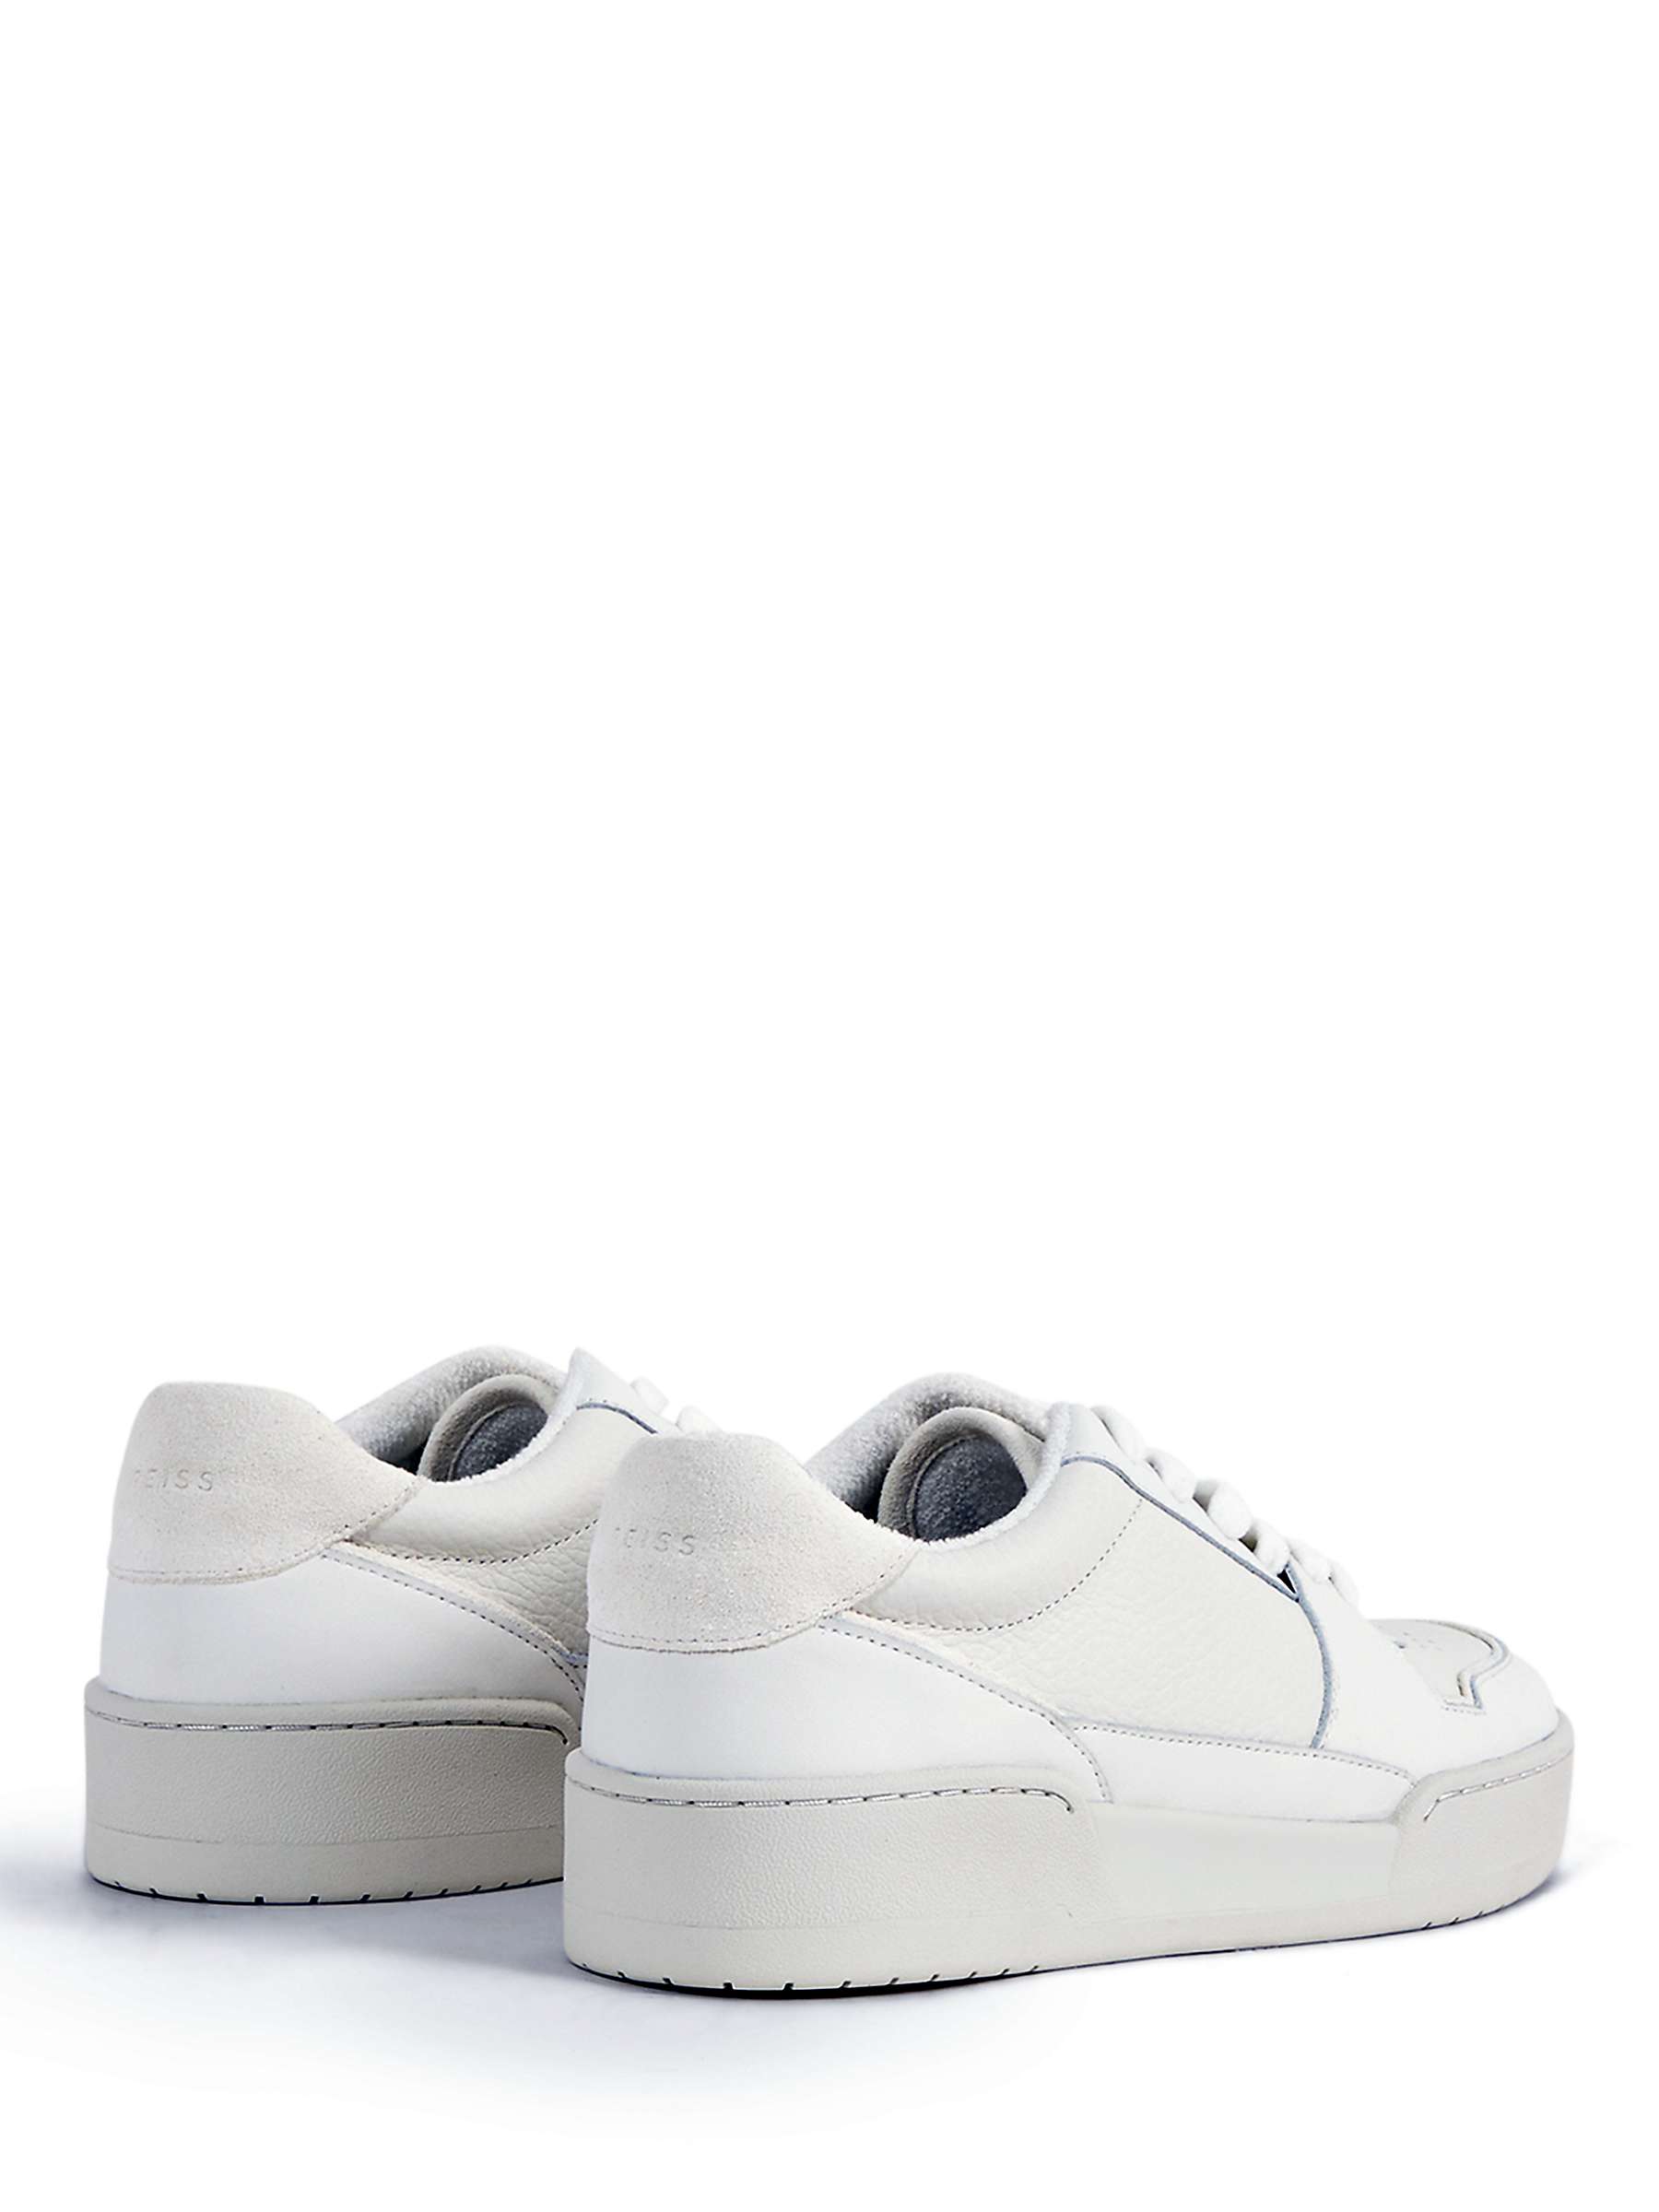 Buy Reiss Frankie Leather Trainers, White Online at johnlewis.com